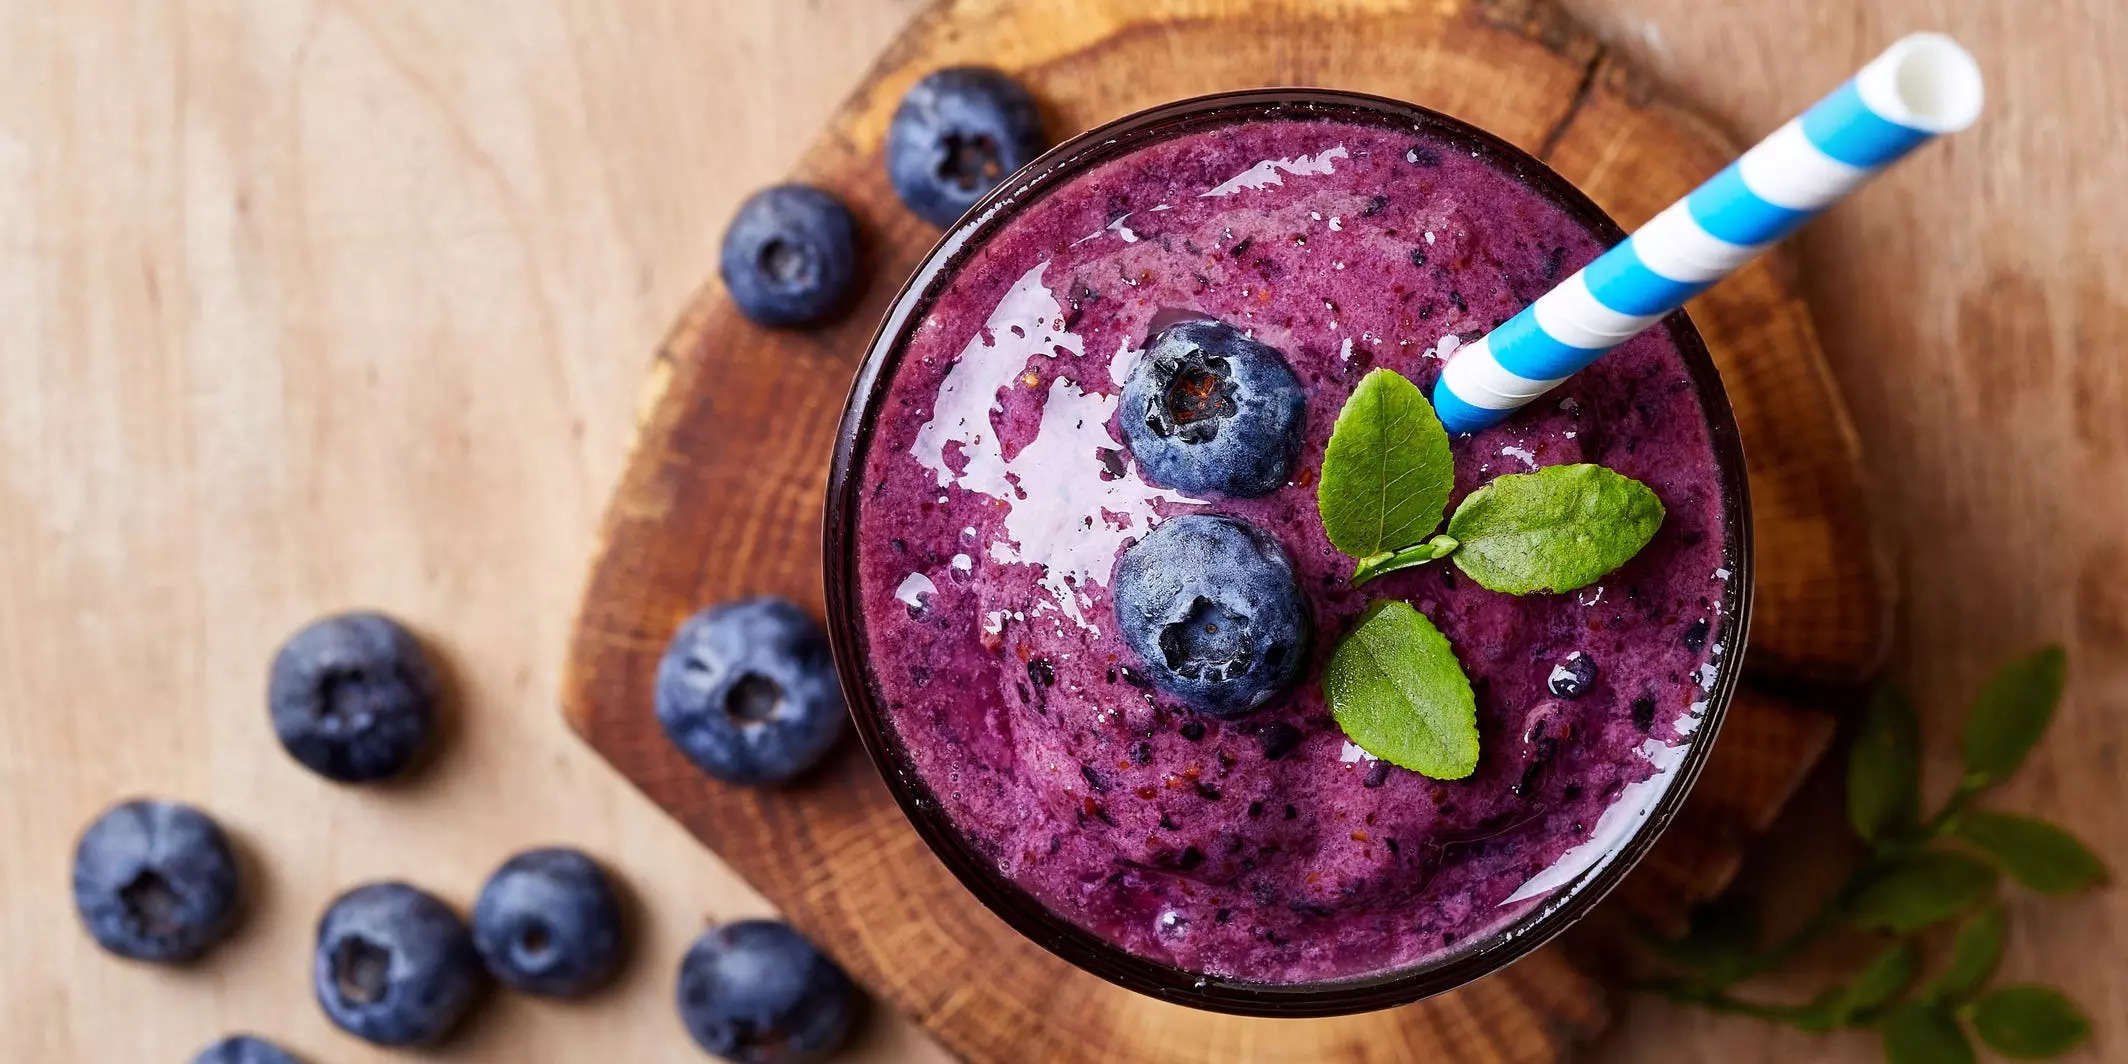 https://www.businessinsider.in/photo/91650275/7-quick-and-easy-ways-to-thicken-up-a-watery-smoothie.jpg?imgsize=202486